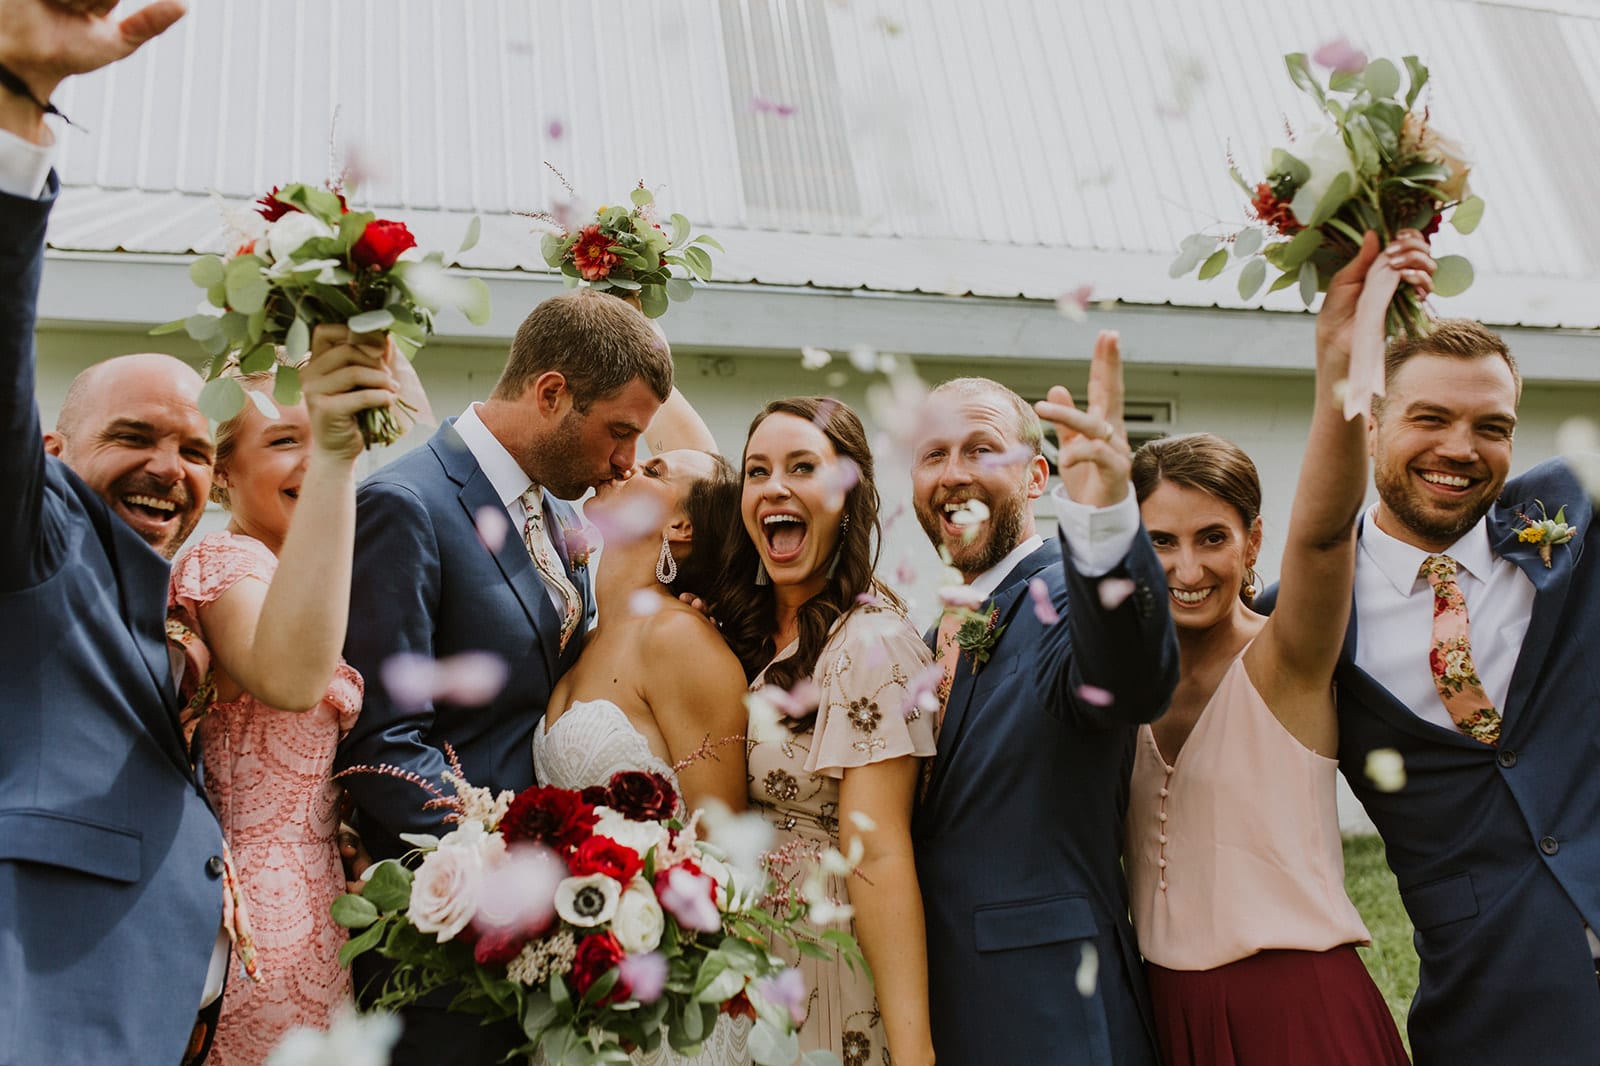 Celebratory bridal party, laughing and smiling while the happy bride and groom kiss